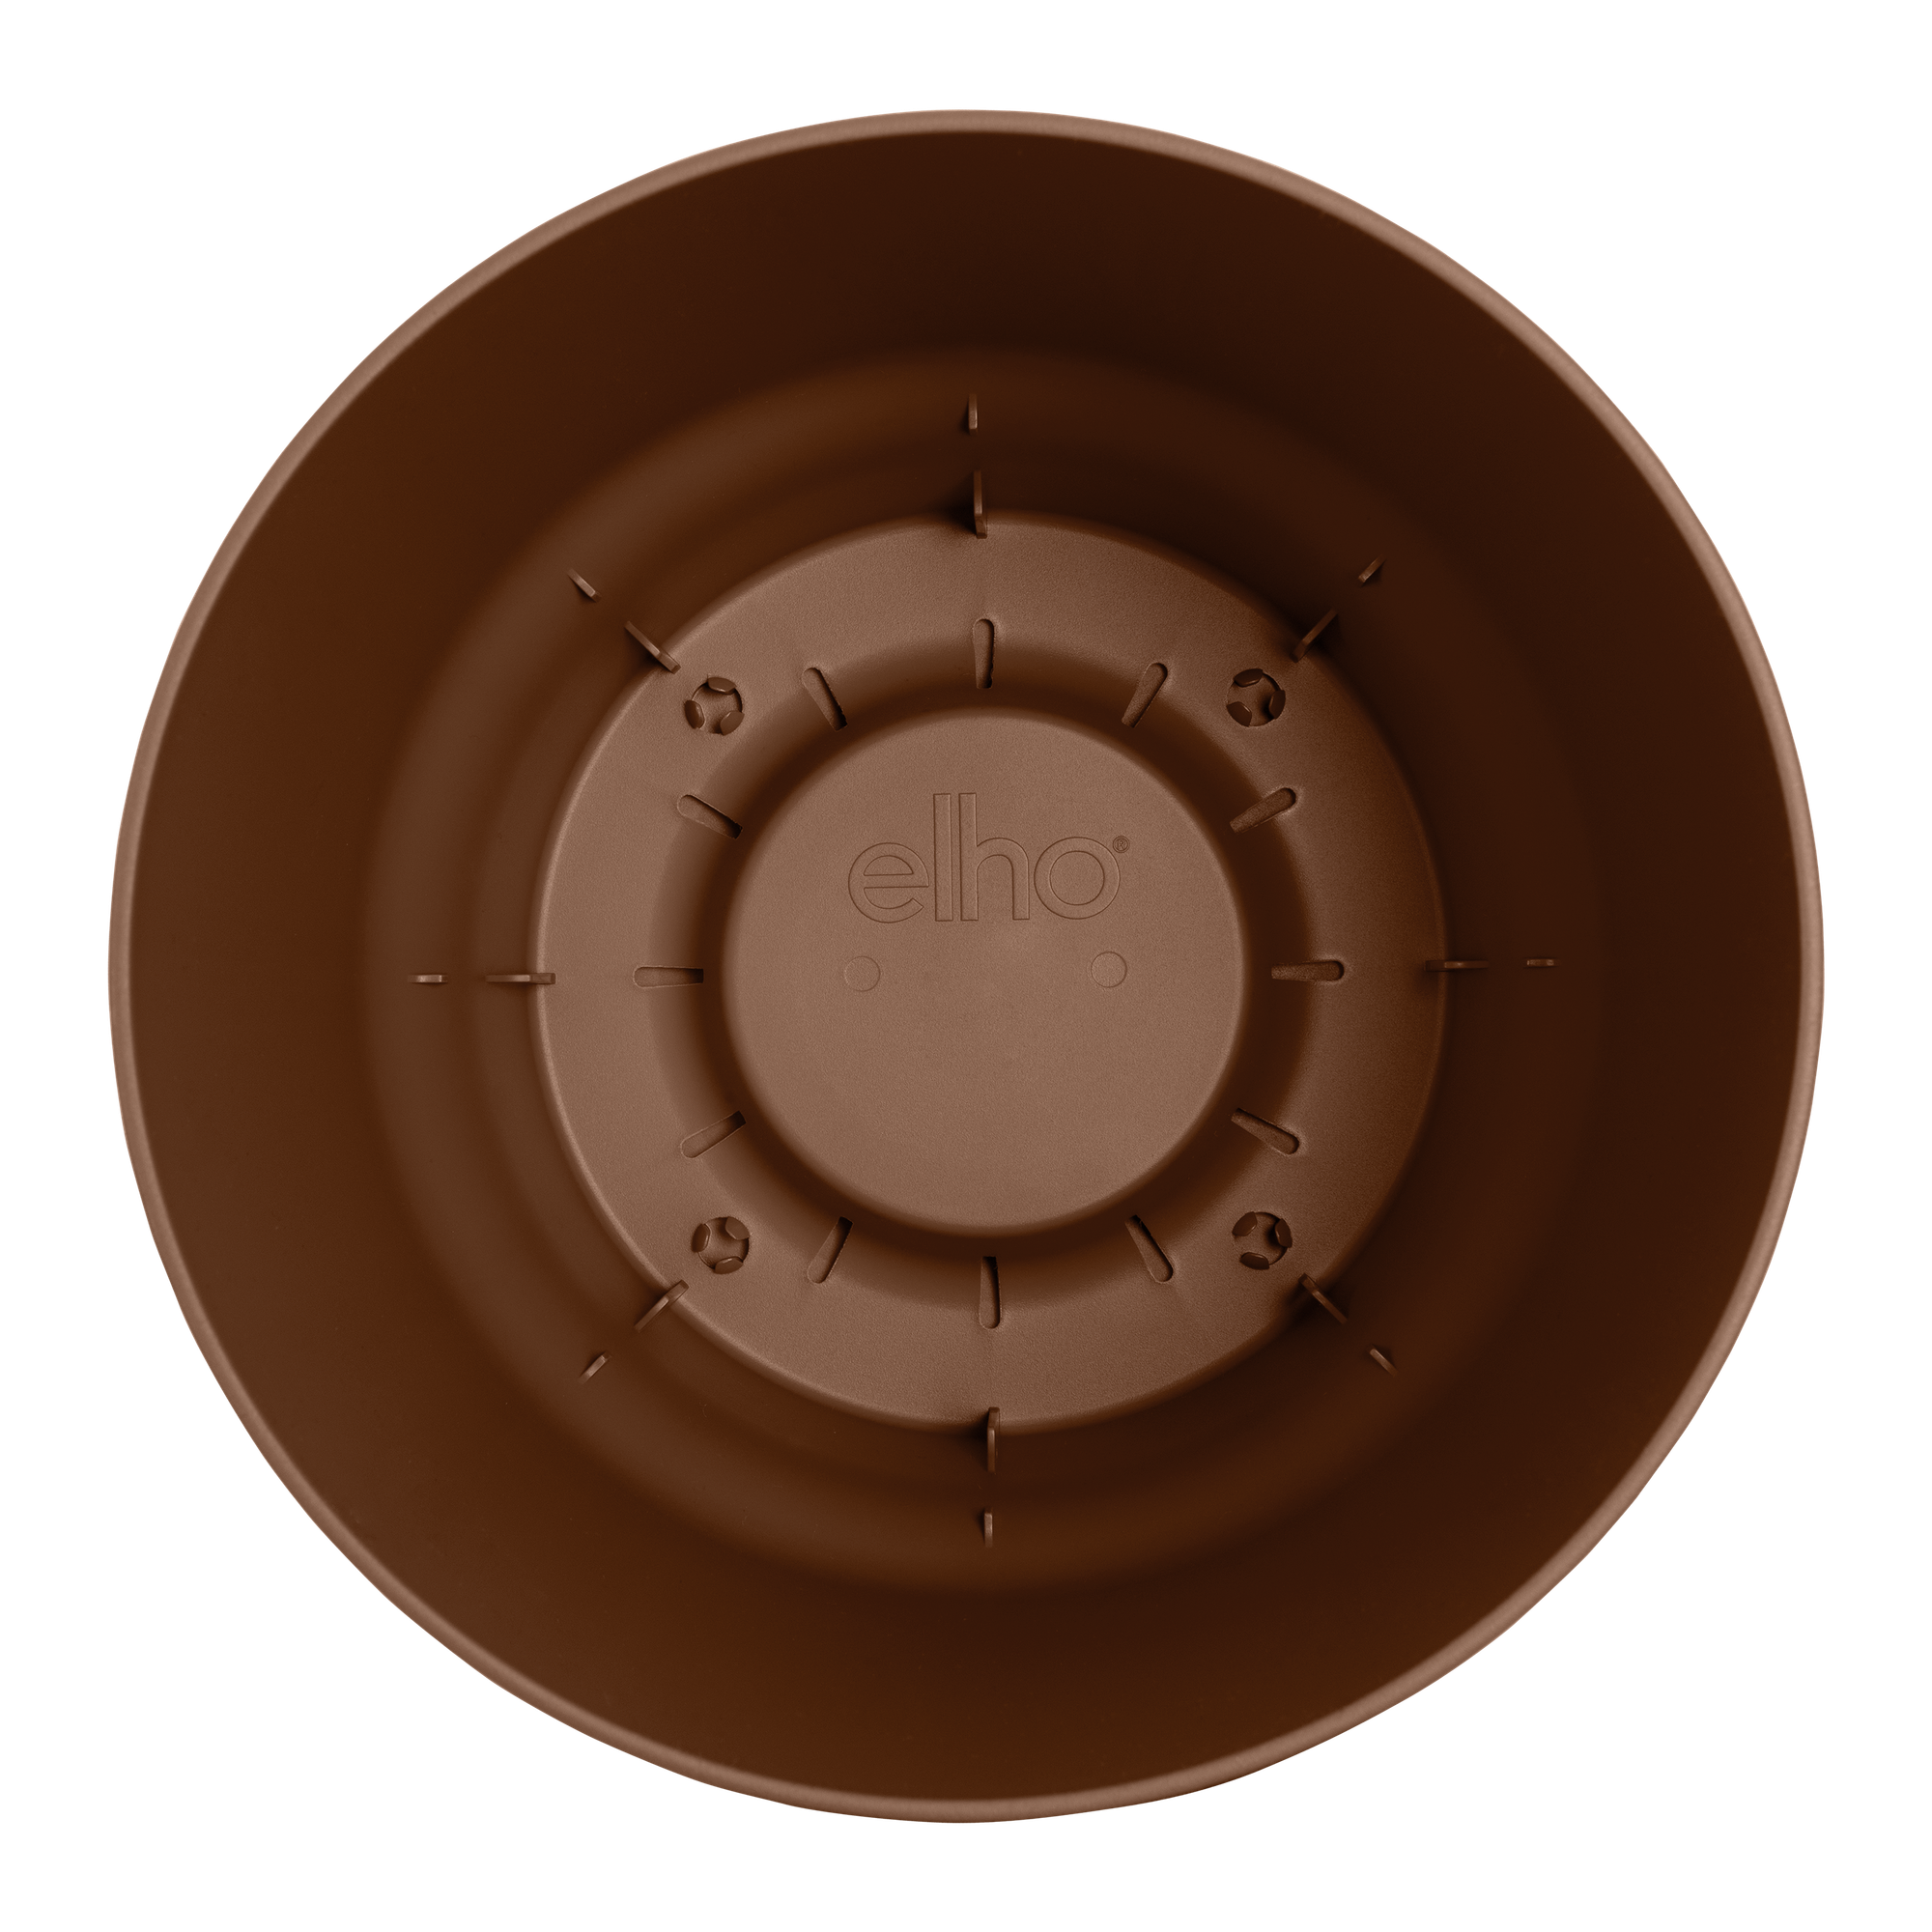 greenville round 14cm ginger brown nature Give elho® to room - 